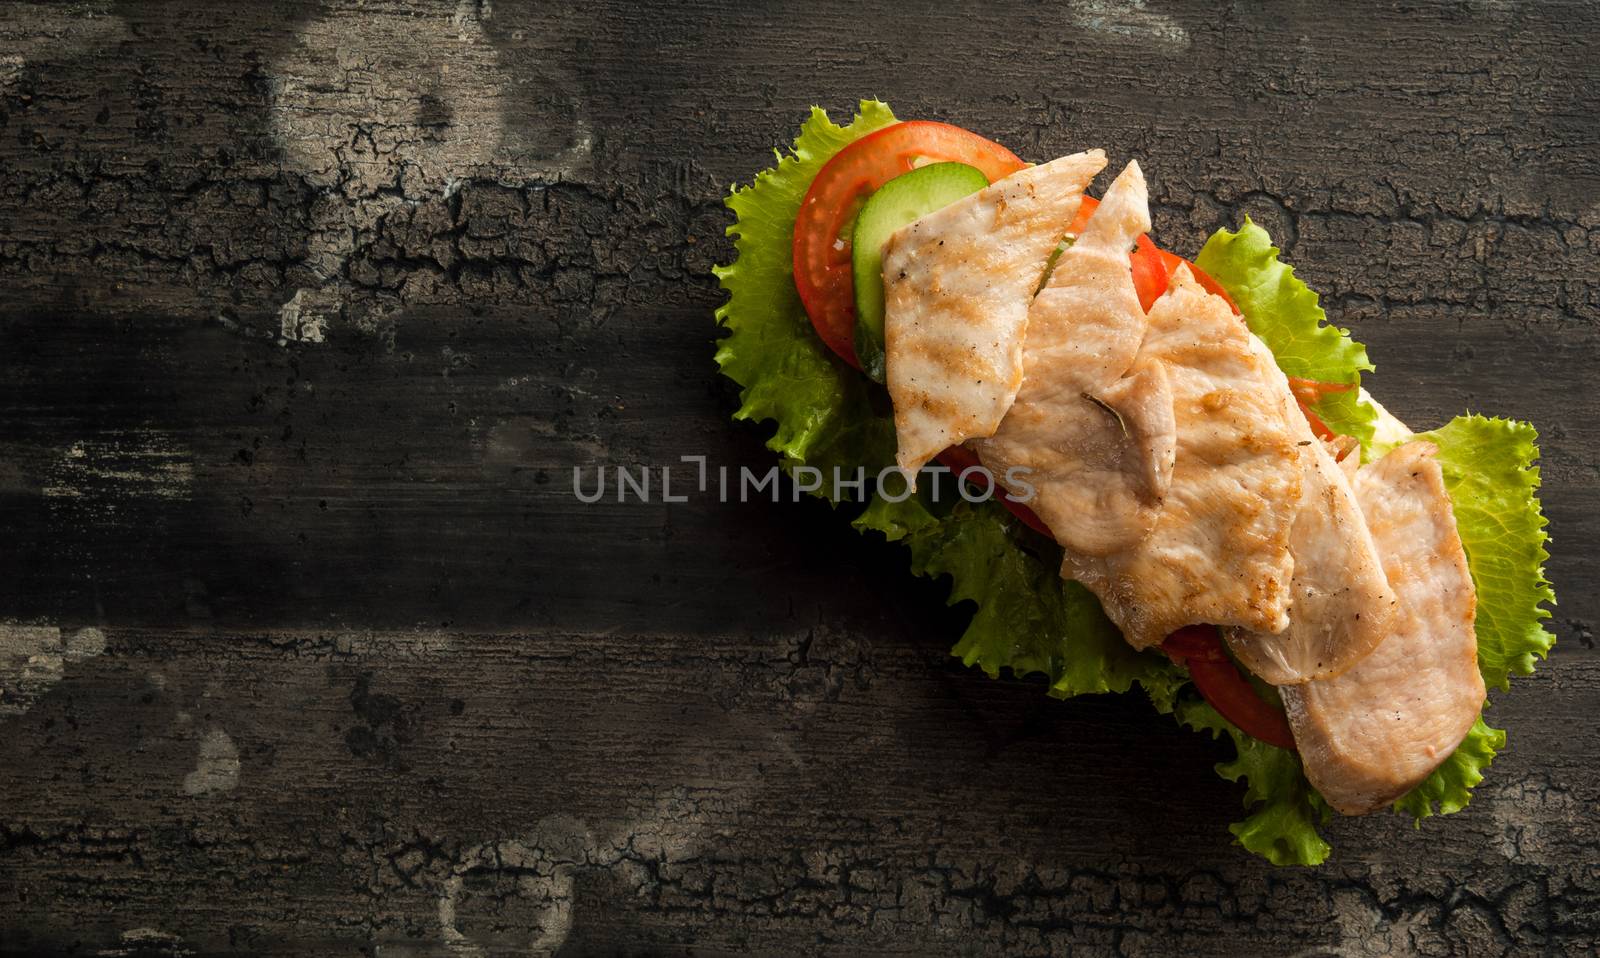 cheeseburger on an old wooden surface of dark color. hamburger with chicken meat on an old wooden surface of dark color